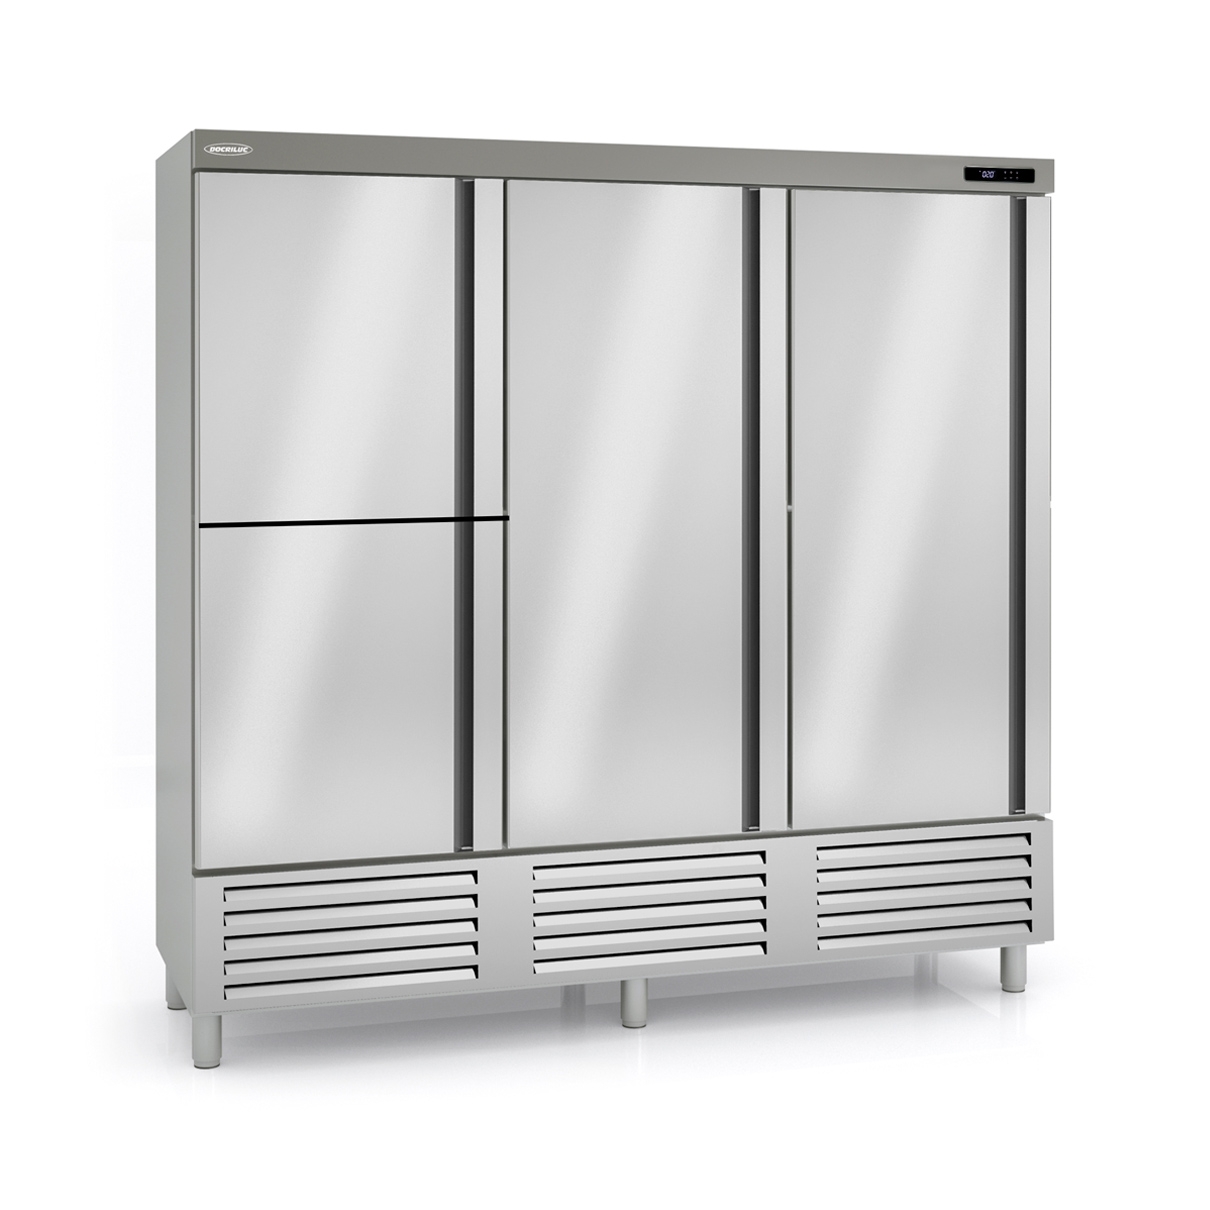 Snack Refrigerated Cabinet ARS-210-4